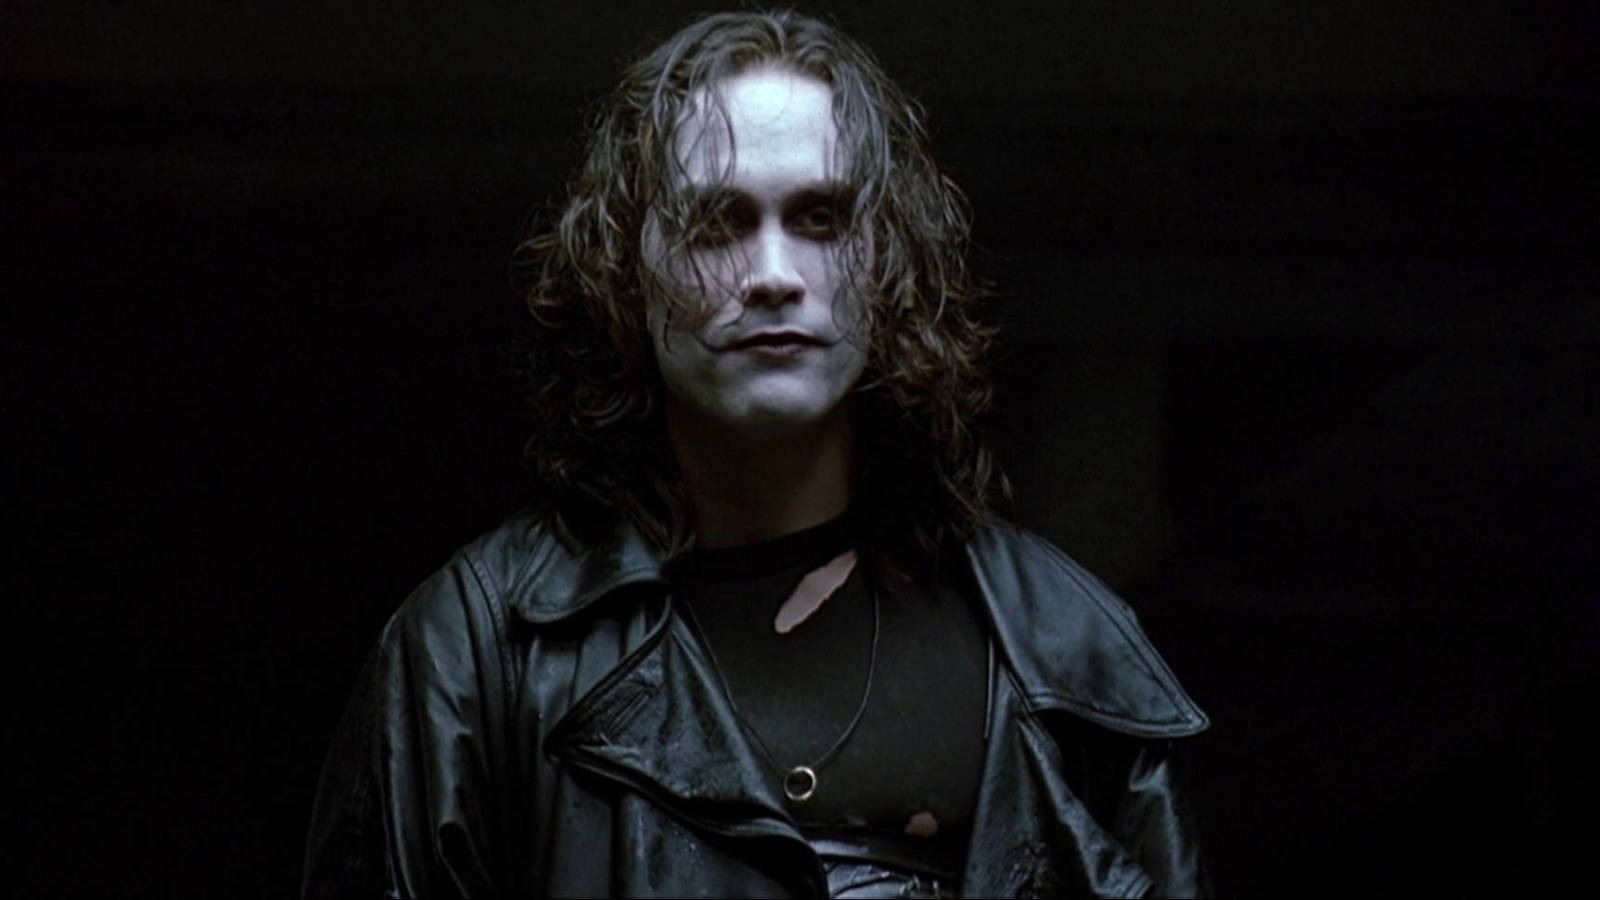 If Brandon Lee Had His Way, The Crow Would Look Very Different